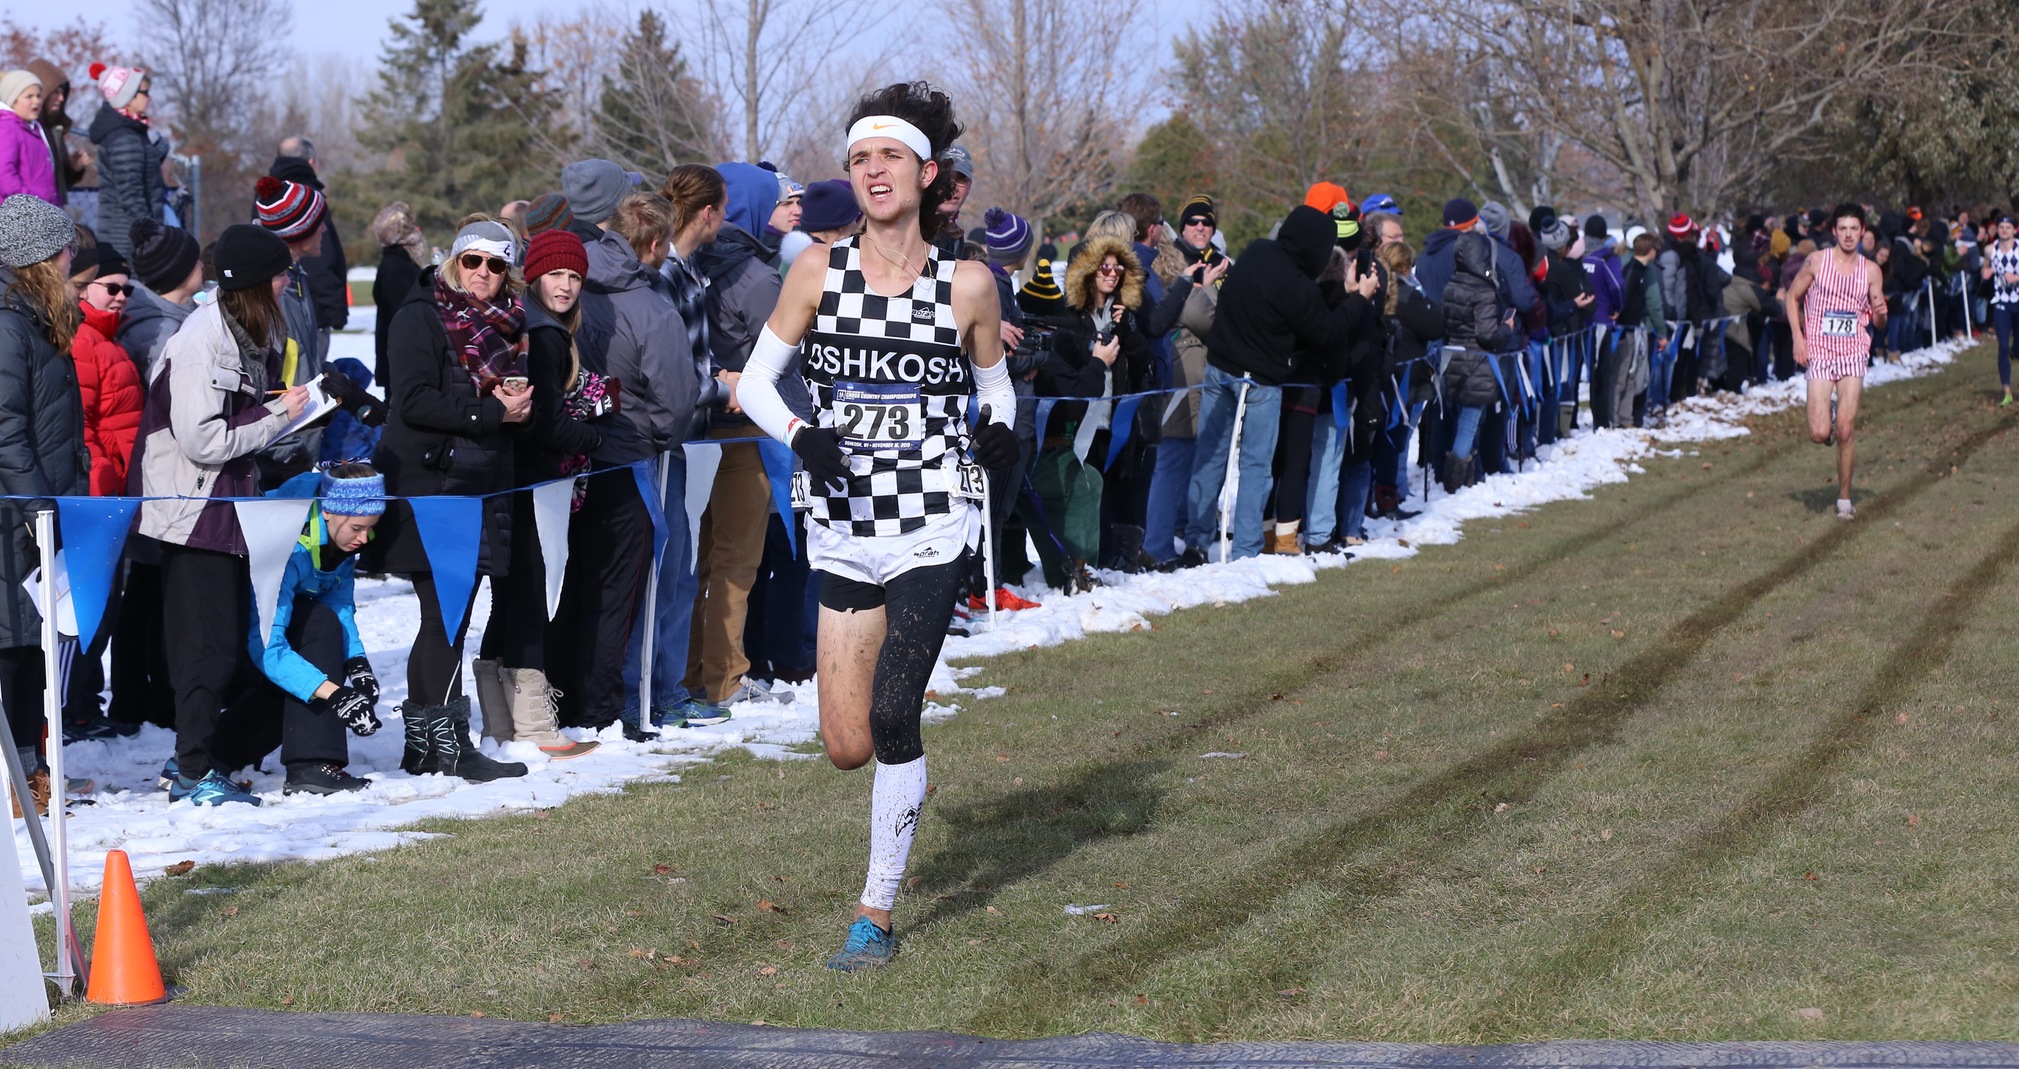 Cody Chadwick crossed the finish line in 11th place at the Midwest Regional.